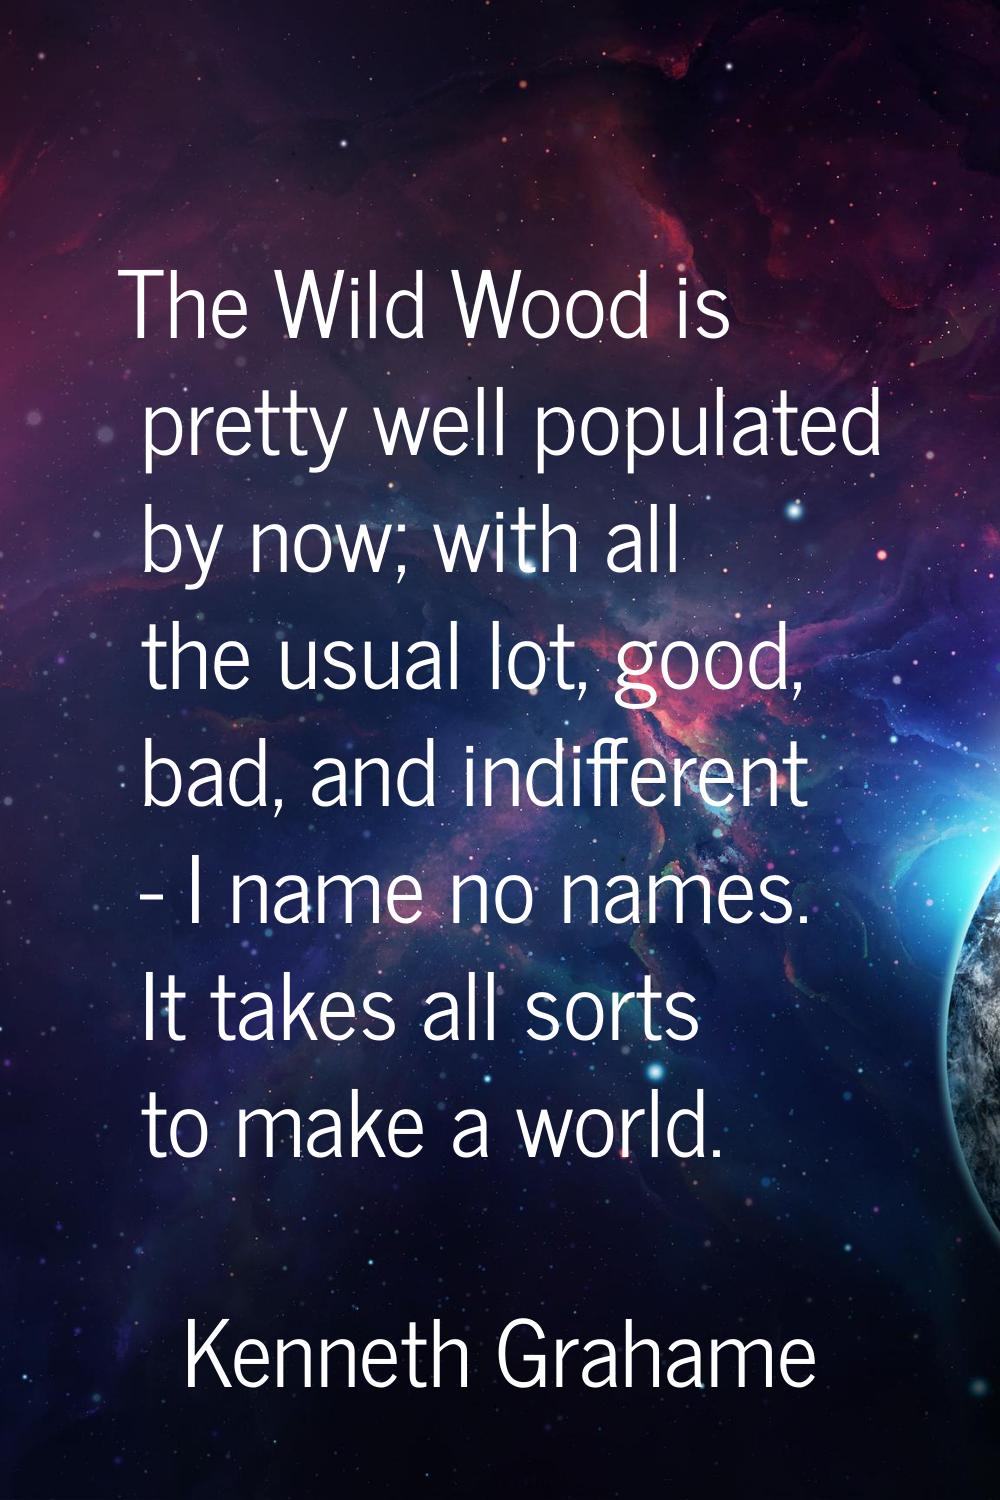 The Wild Wood is pretty well populated by now; with all the usual lot, good, bad, and indifferent -